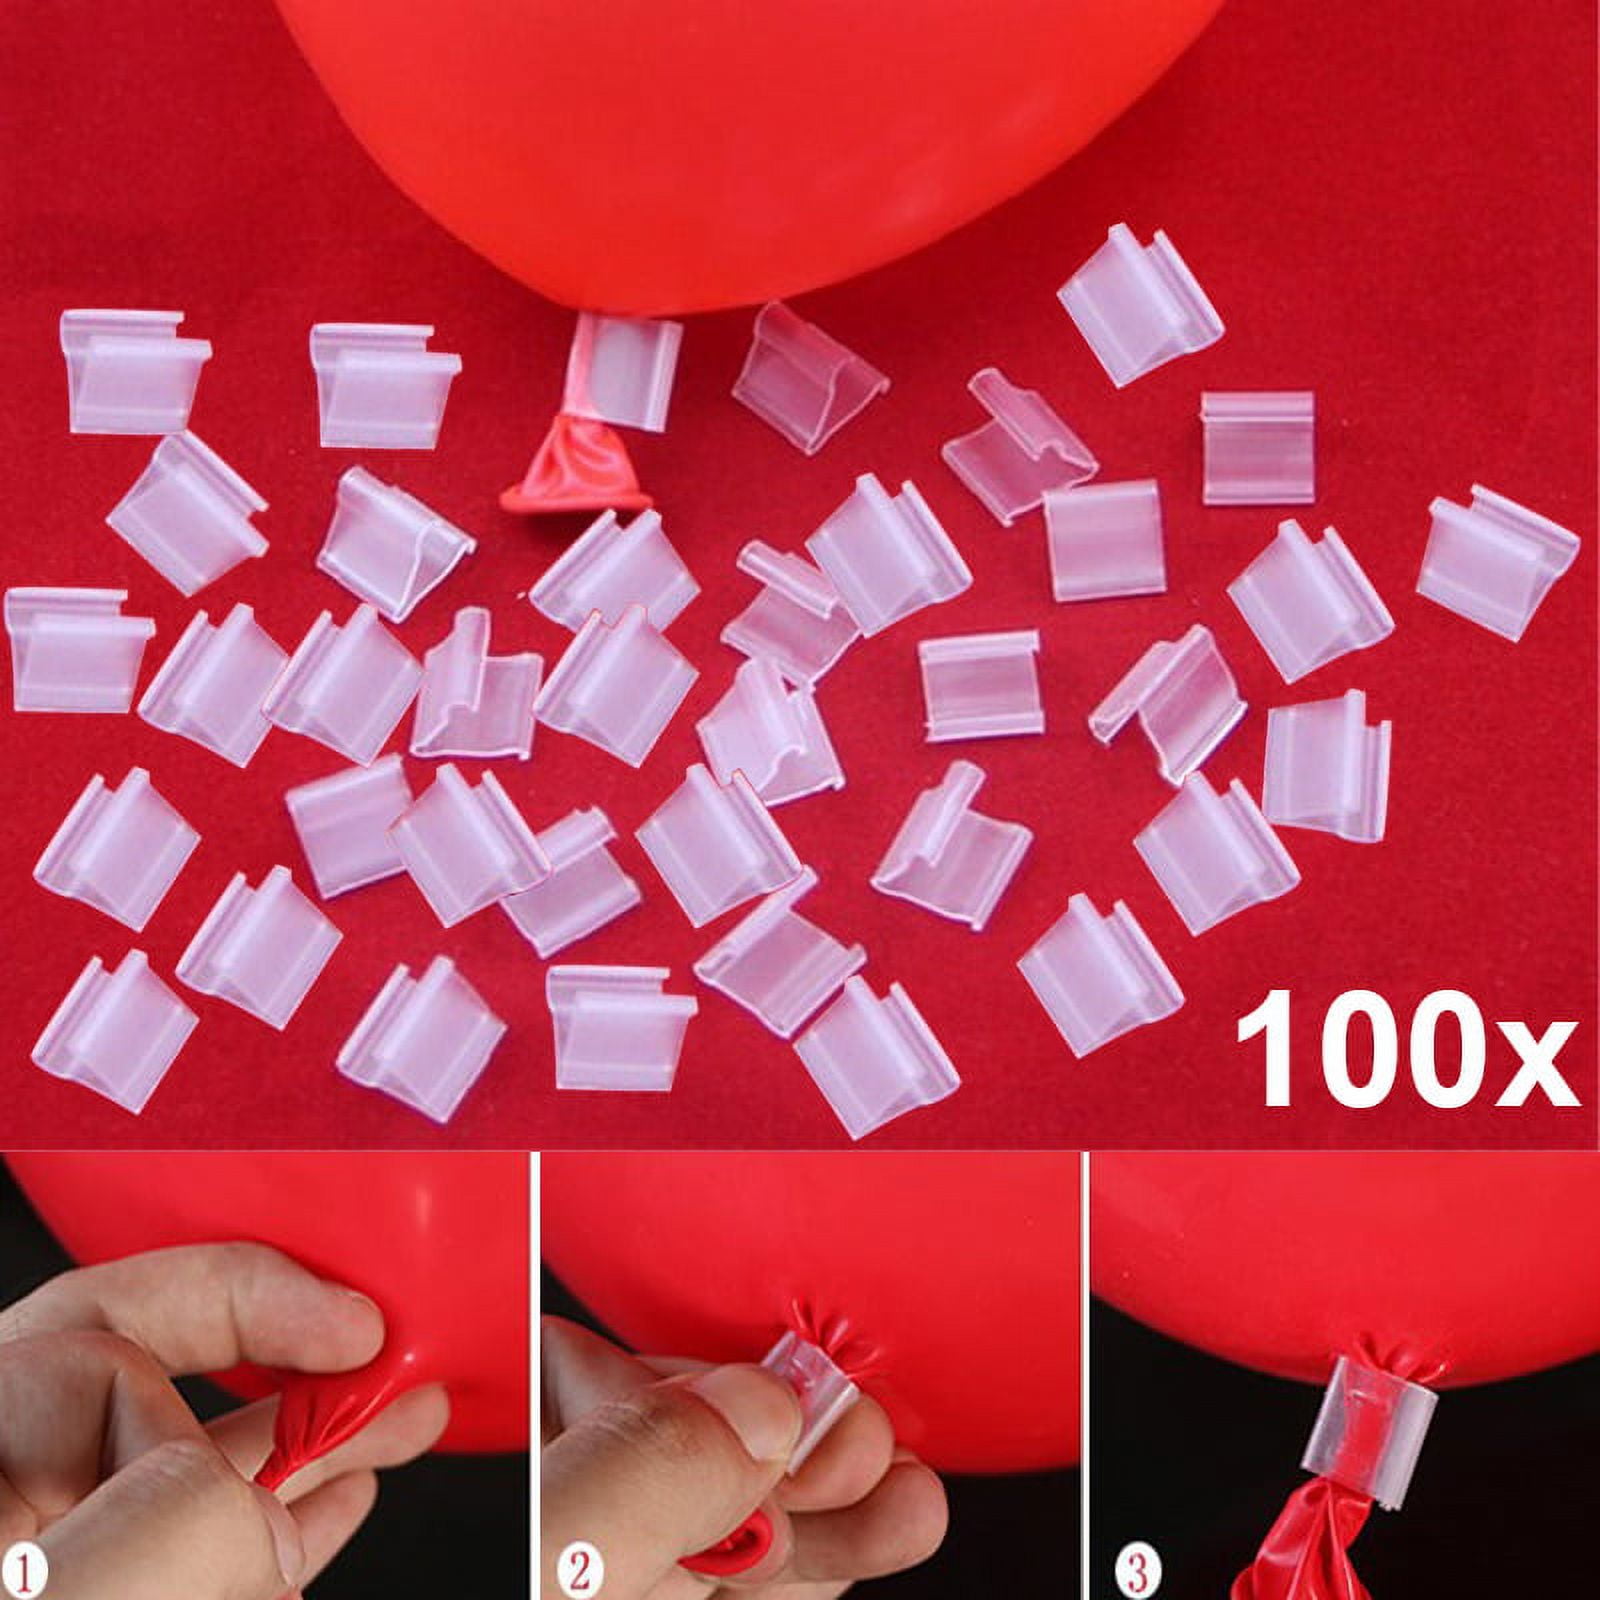 Balloon Closures 100 Pcs Balloon Ribbon Helium Balloon Clasp Seal for  Birthday Party Baby Shower Wedding Decorations 